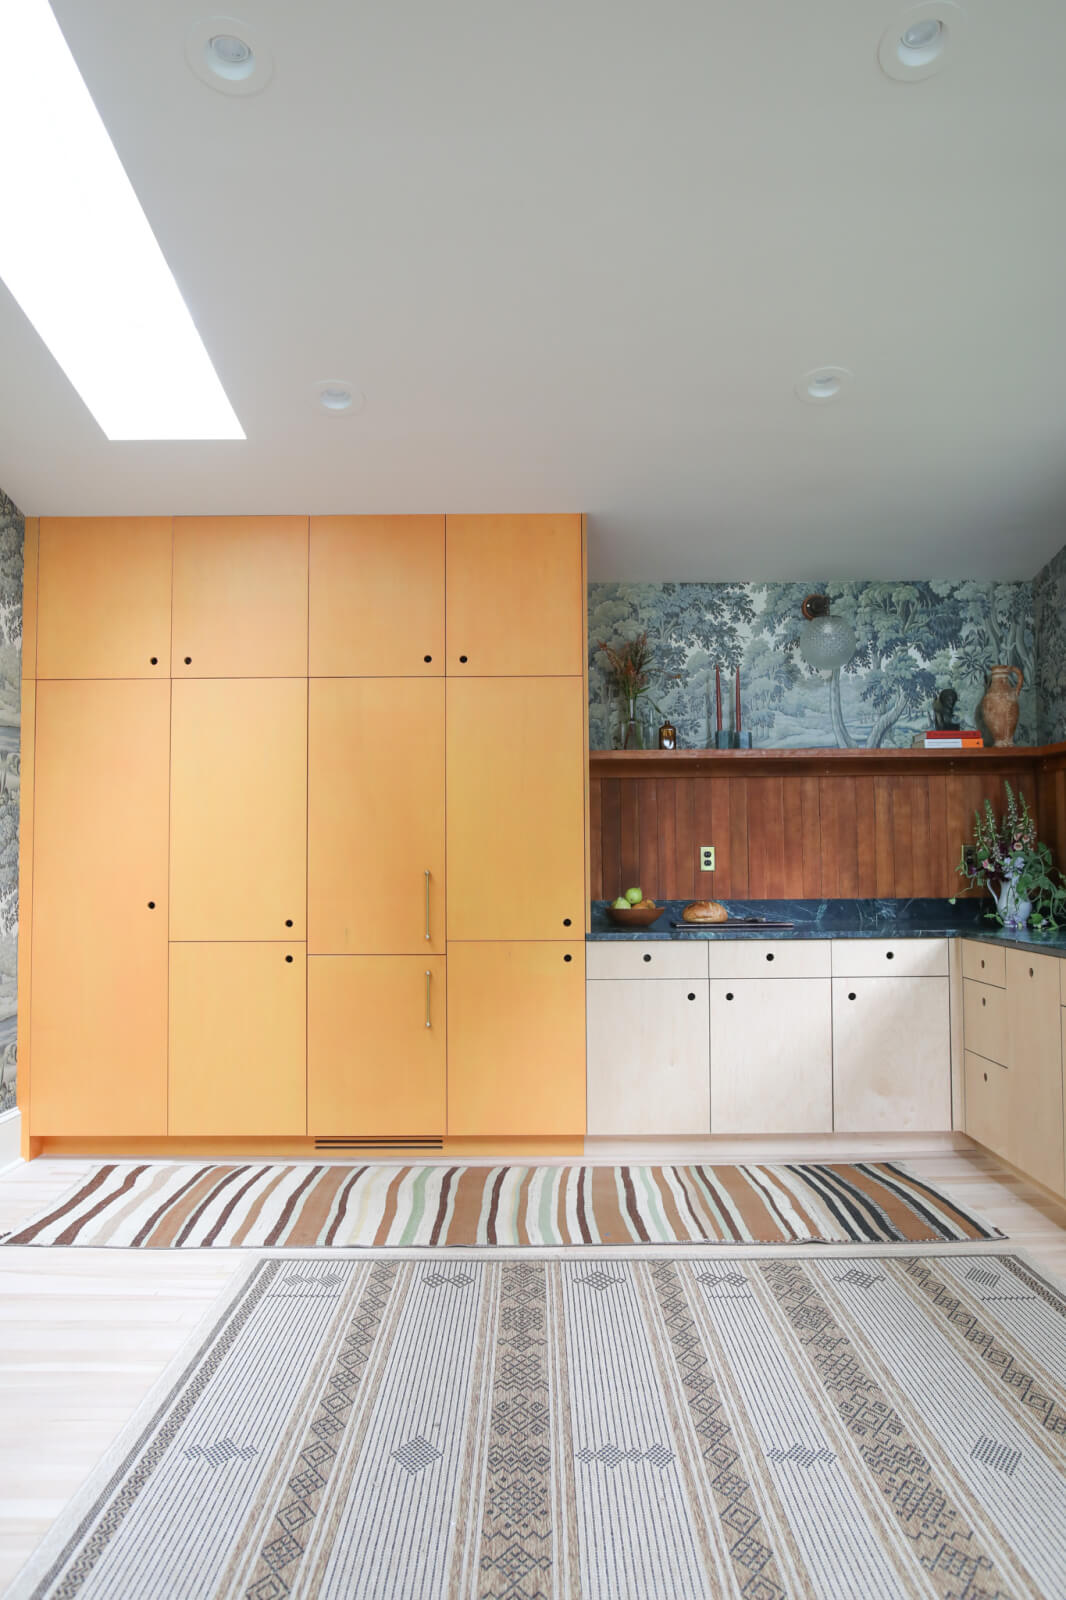 Floor to ceiling orange plywood cabinetry next to maple plywood lower cabinets in Northampton, MA